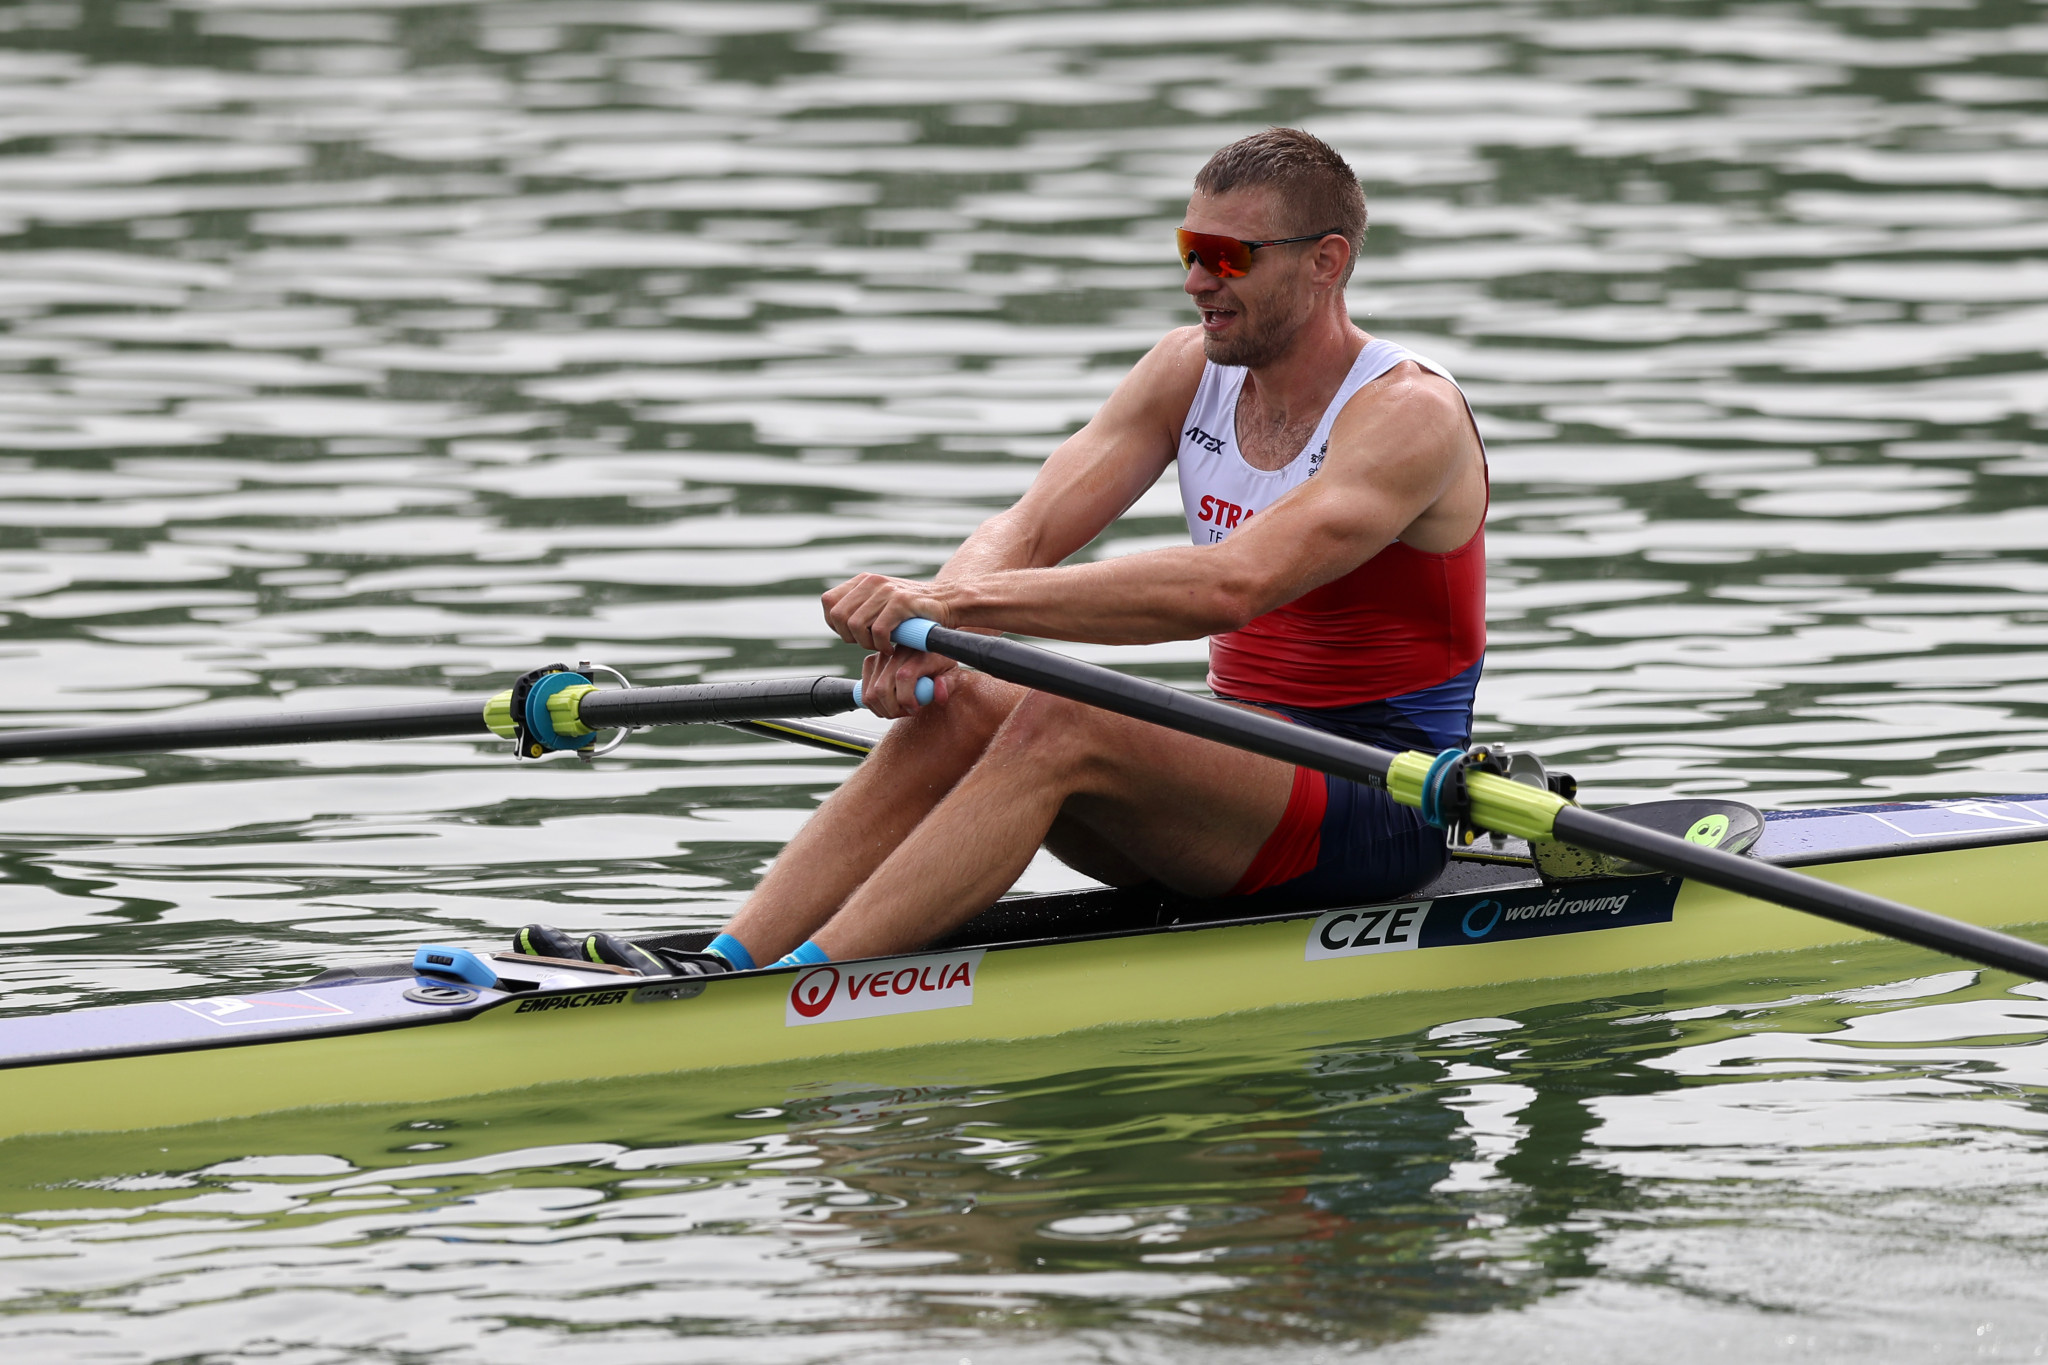 Račice will host the 2022 World Rowing Championships ©Getty Images